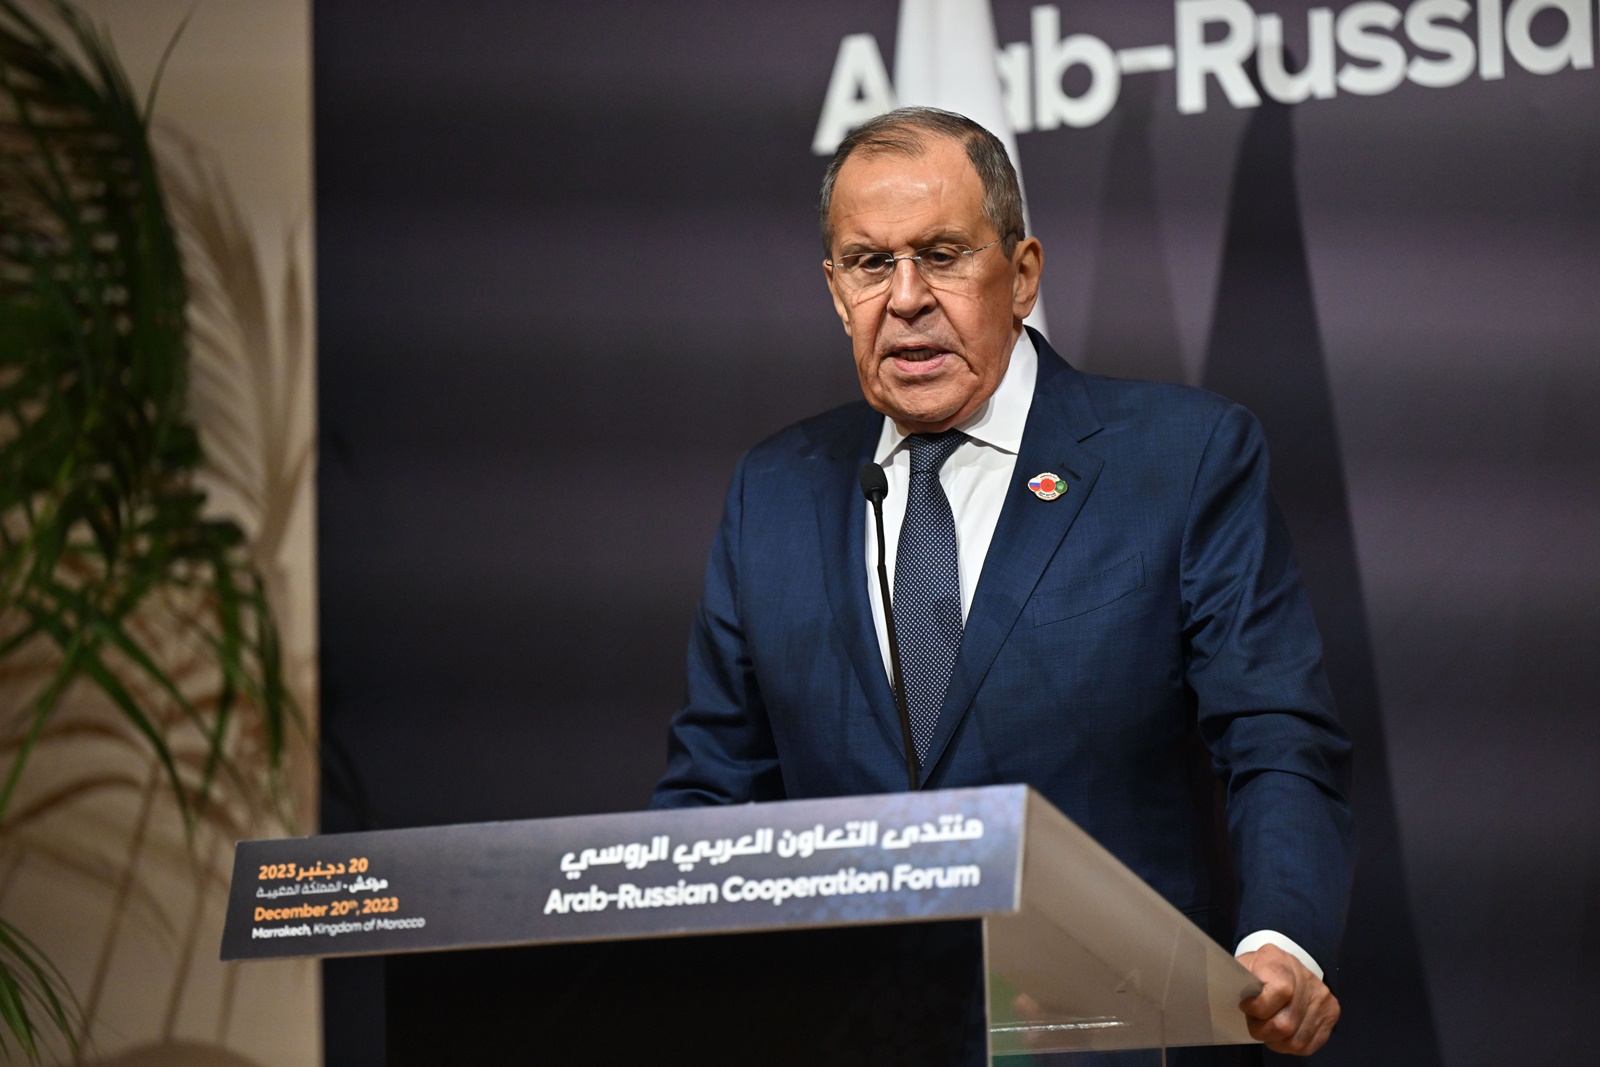 epa11038699 Russia's Foreign Minister Sergei Lavrov takes part in a joint press conference during the 6th Arab-Russian Cooperation Forum, in Marrakesh, Morocco, 20 December 2023. The regional meeting gathered foreign ministers of participating countries, including Russia, and ministerial delegations from various Arab states.  EPA/JALAL MORCHIDI